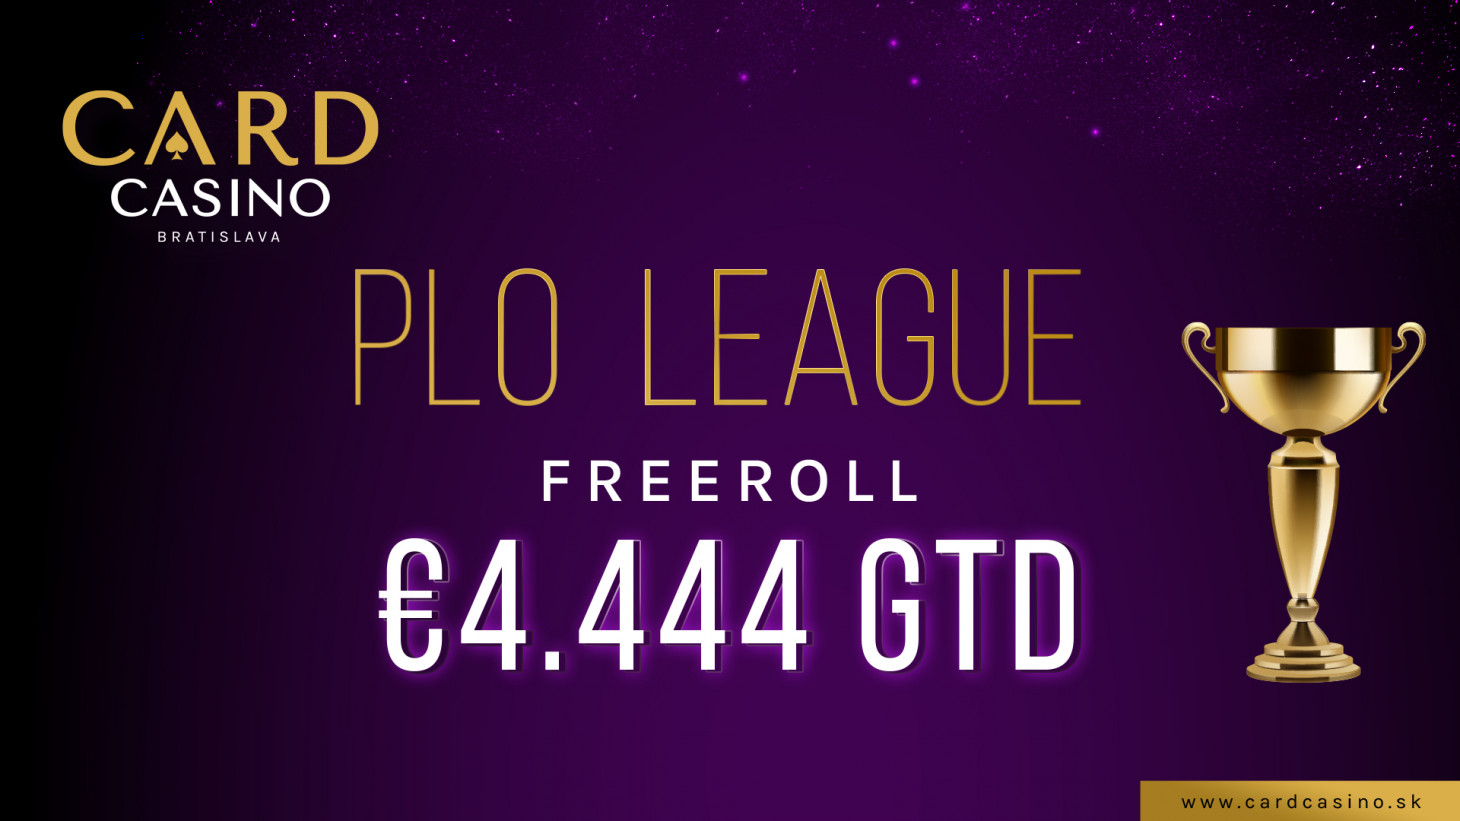 The popular Pot Limit Omaha league is back. Tournaments and a €4,444 Freeroll await you!